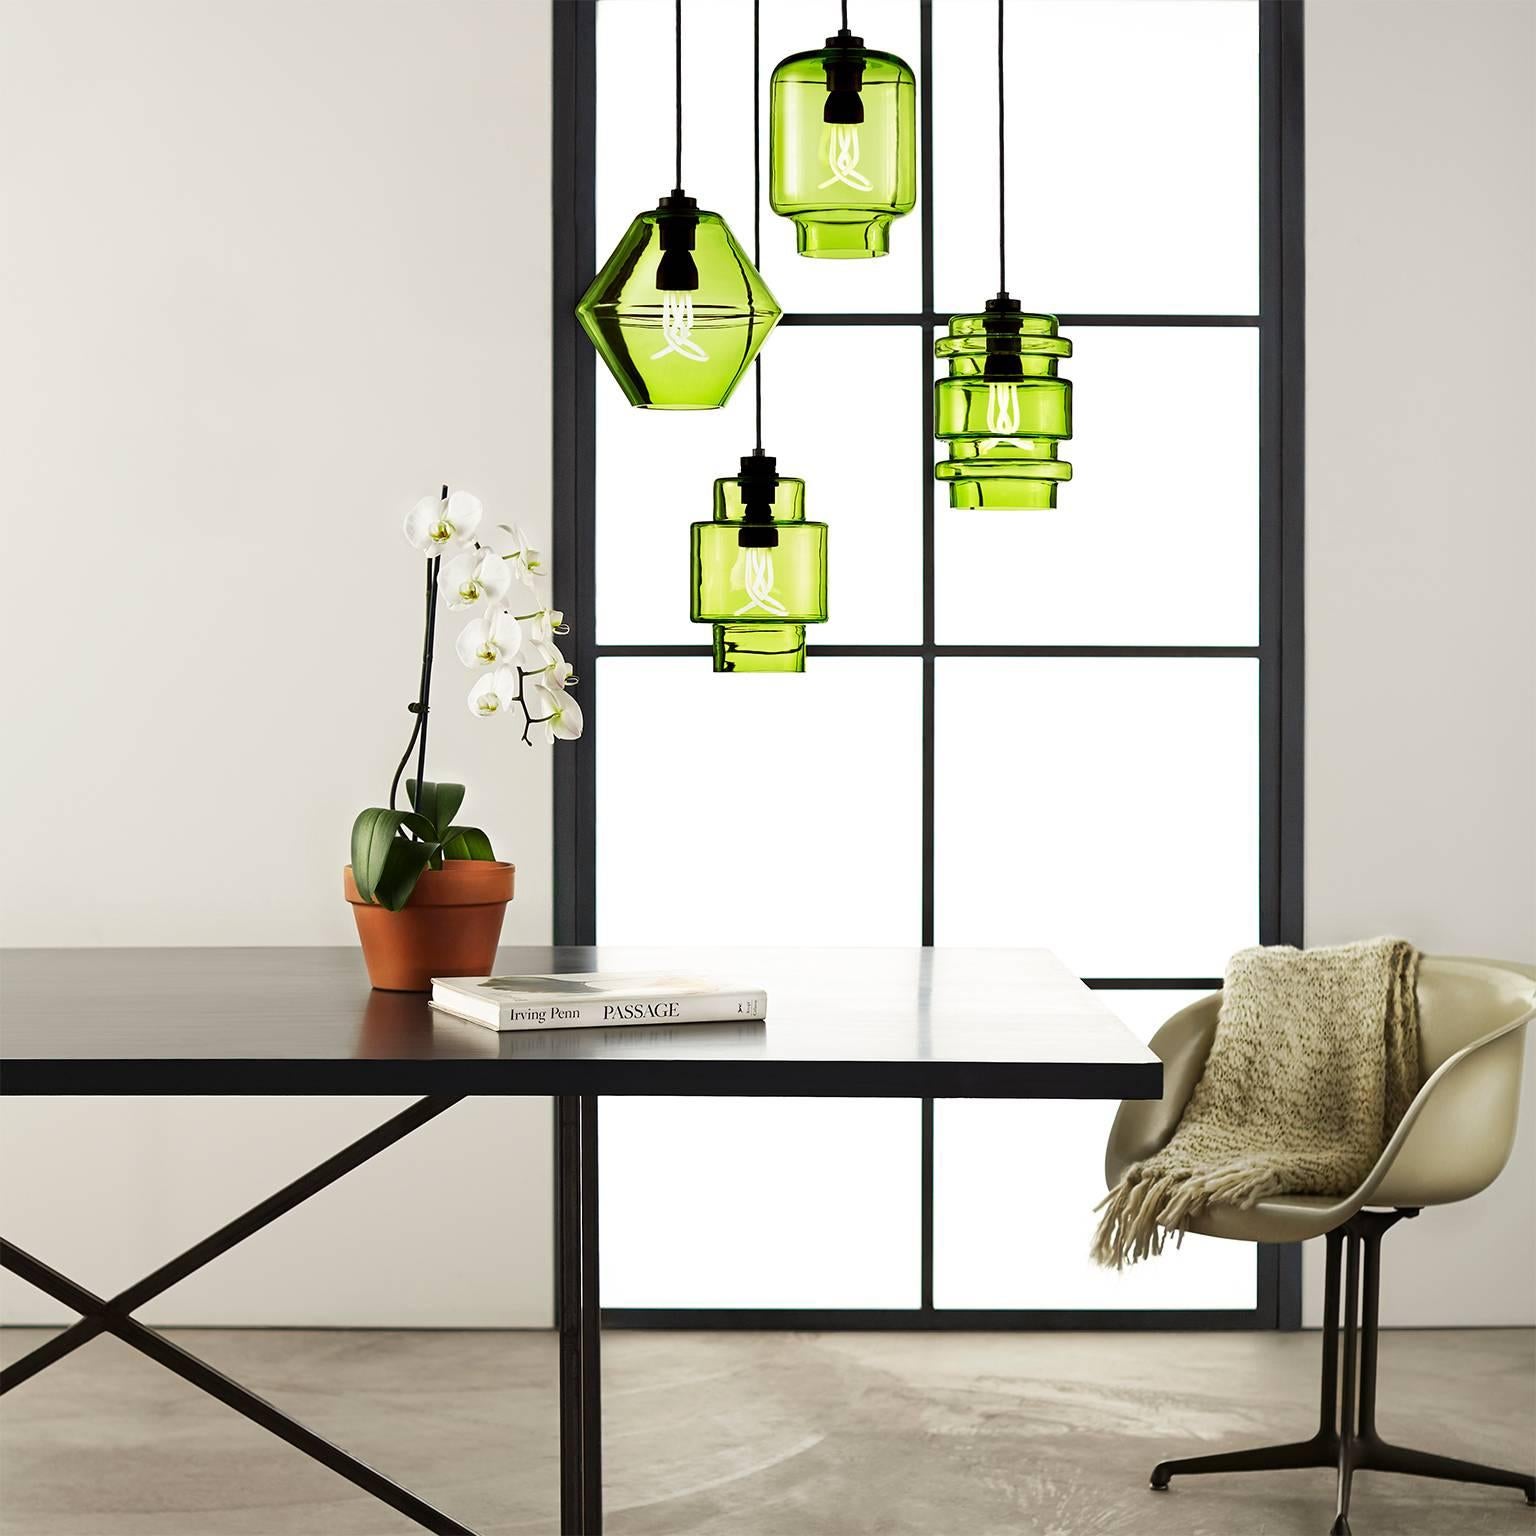 Trove Chartreuse Handblown Modern Glass Pendant Light, Made in the USA For Sale 4